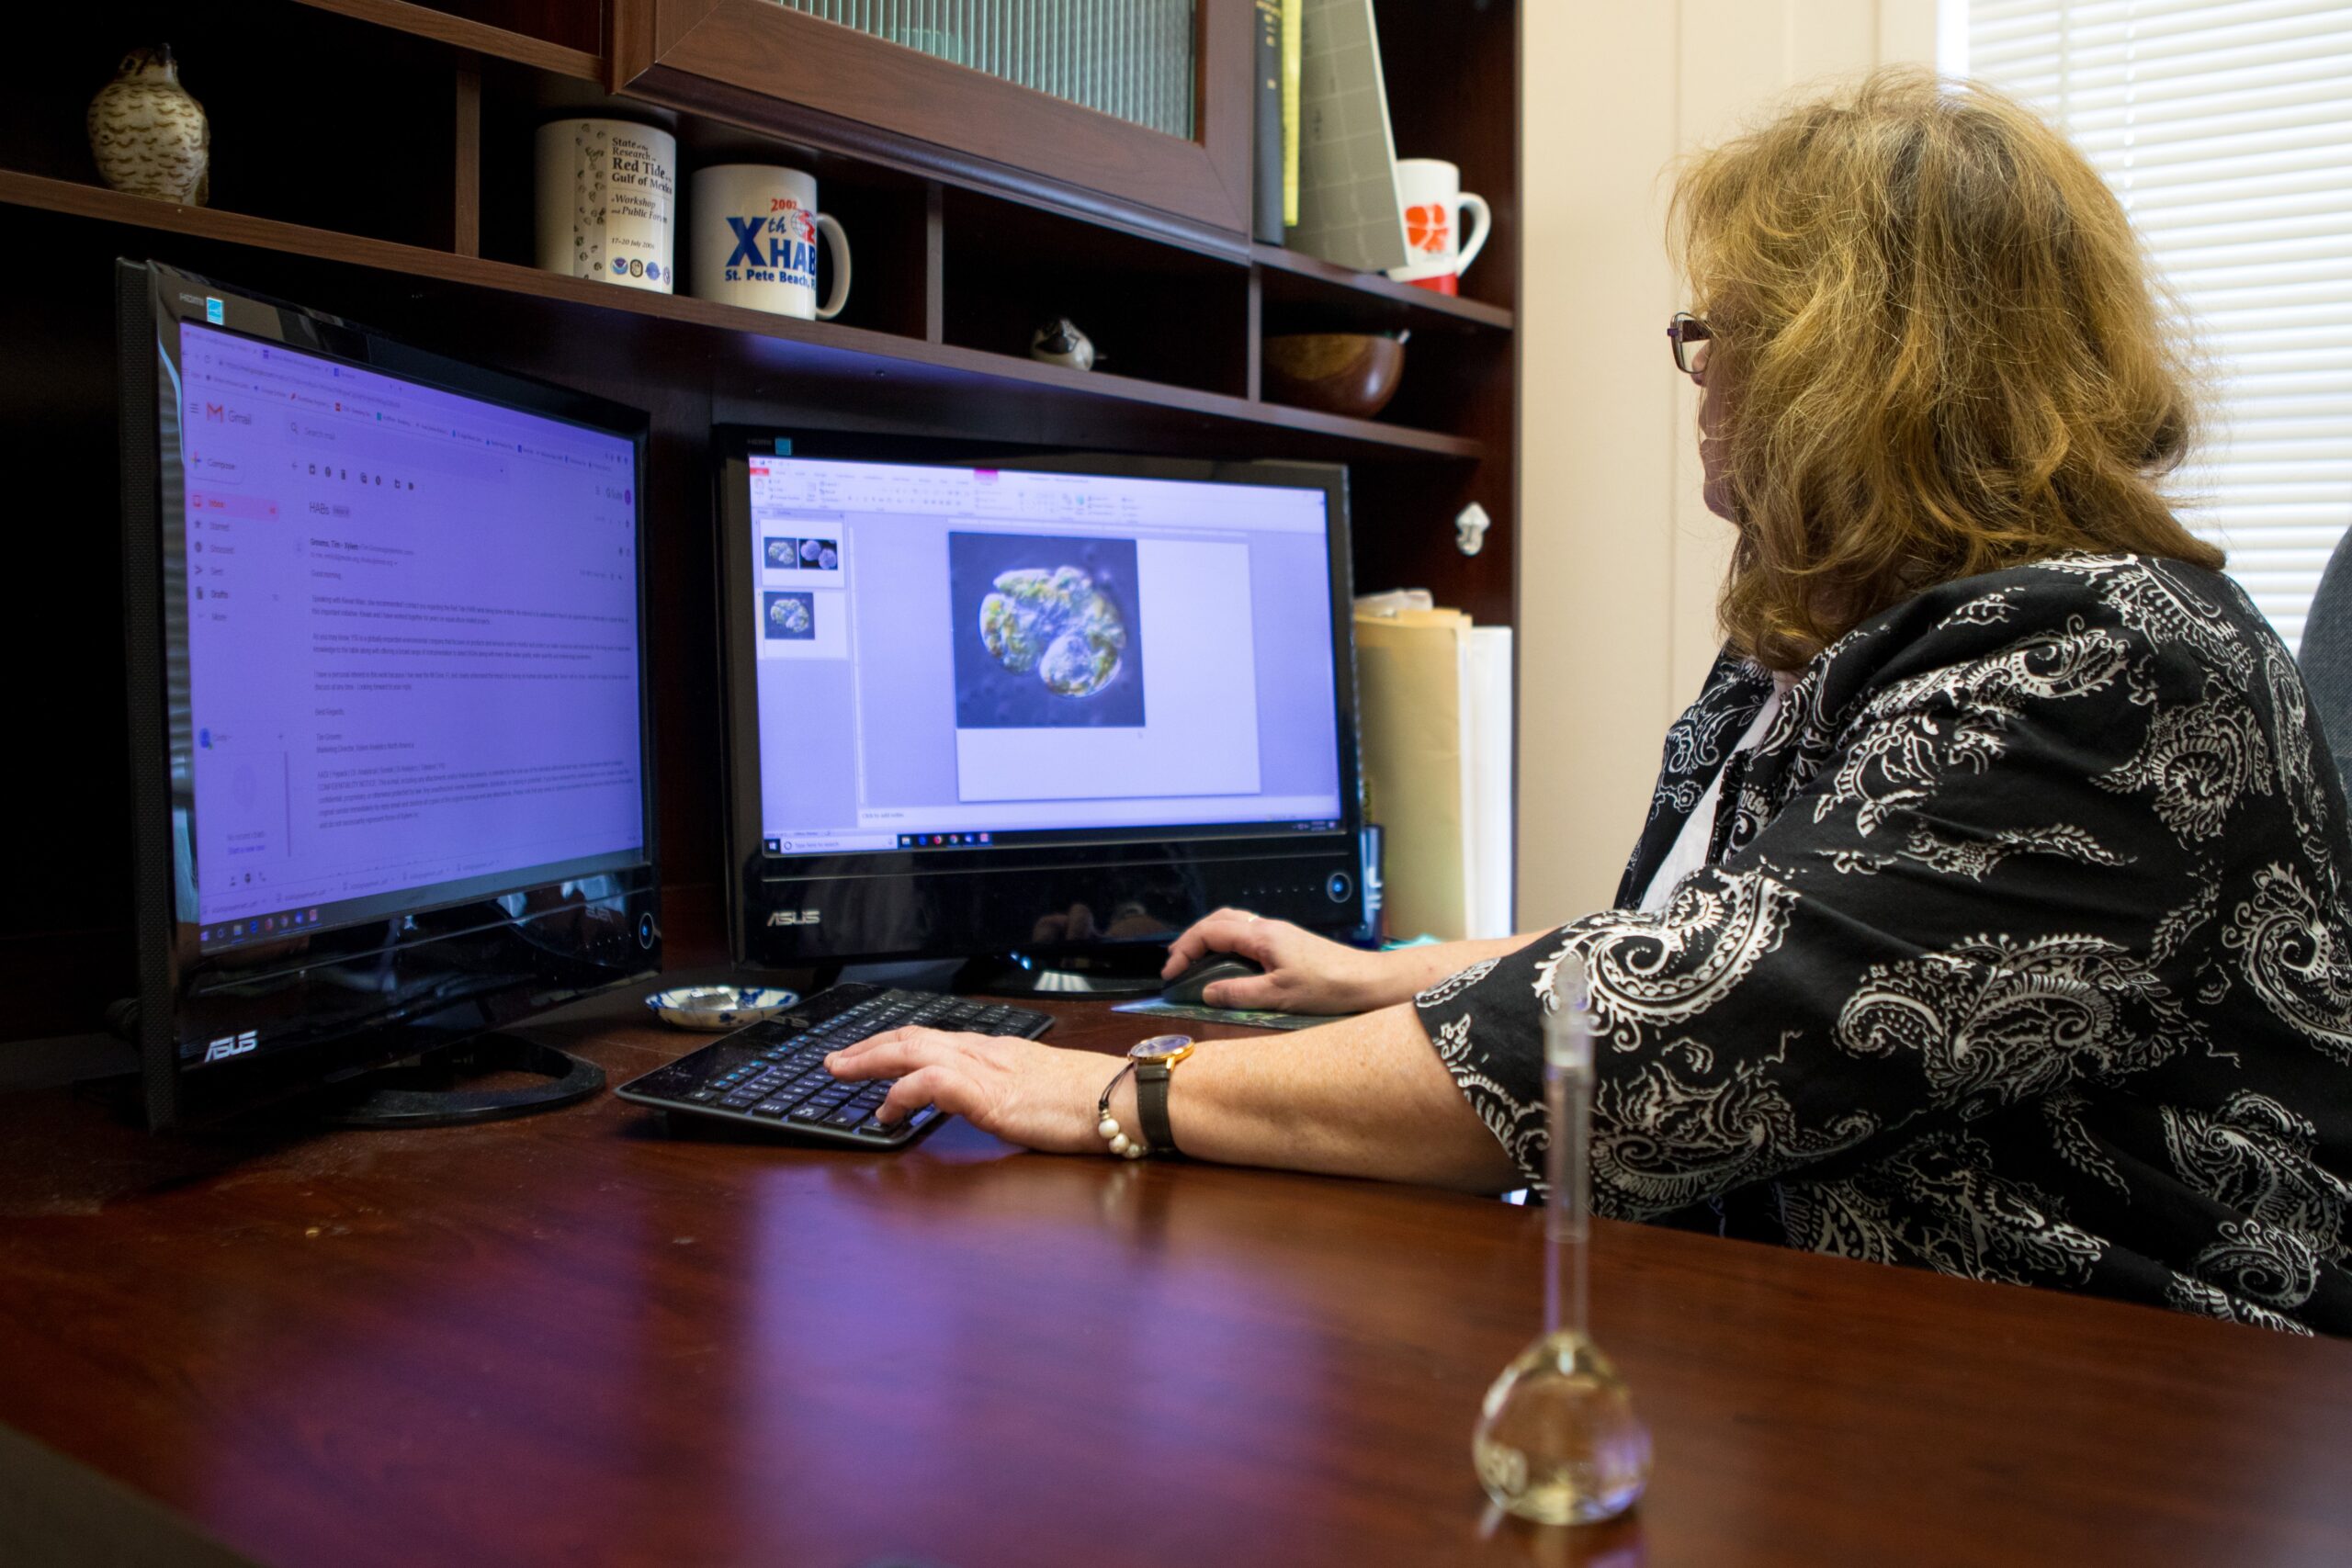 Dr. Cynthia Heil shows a microscope image of the red tide alga Karenia brevis on her computer.